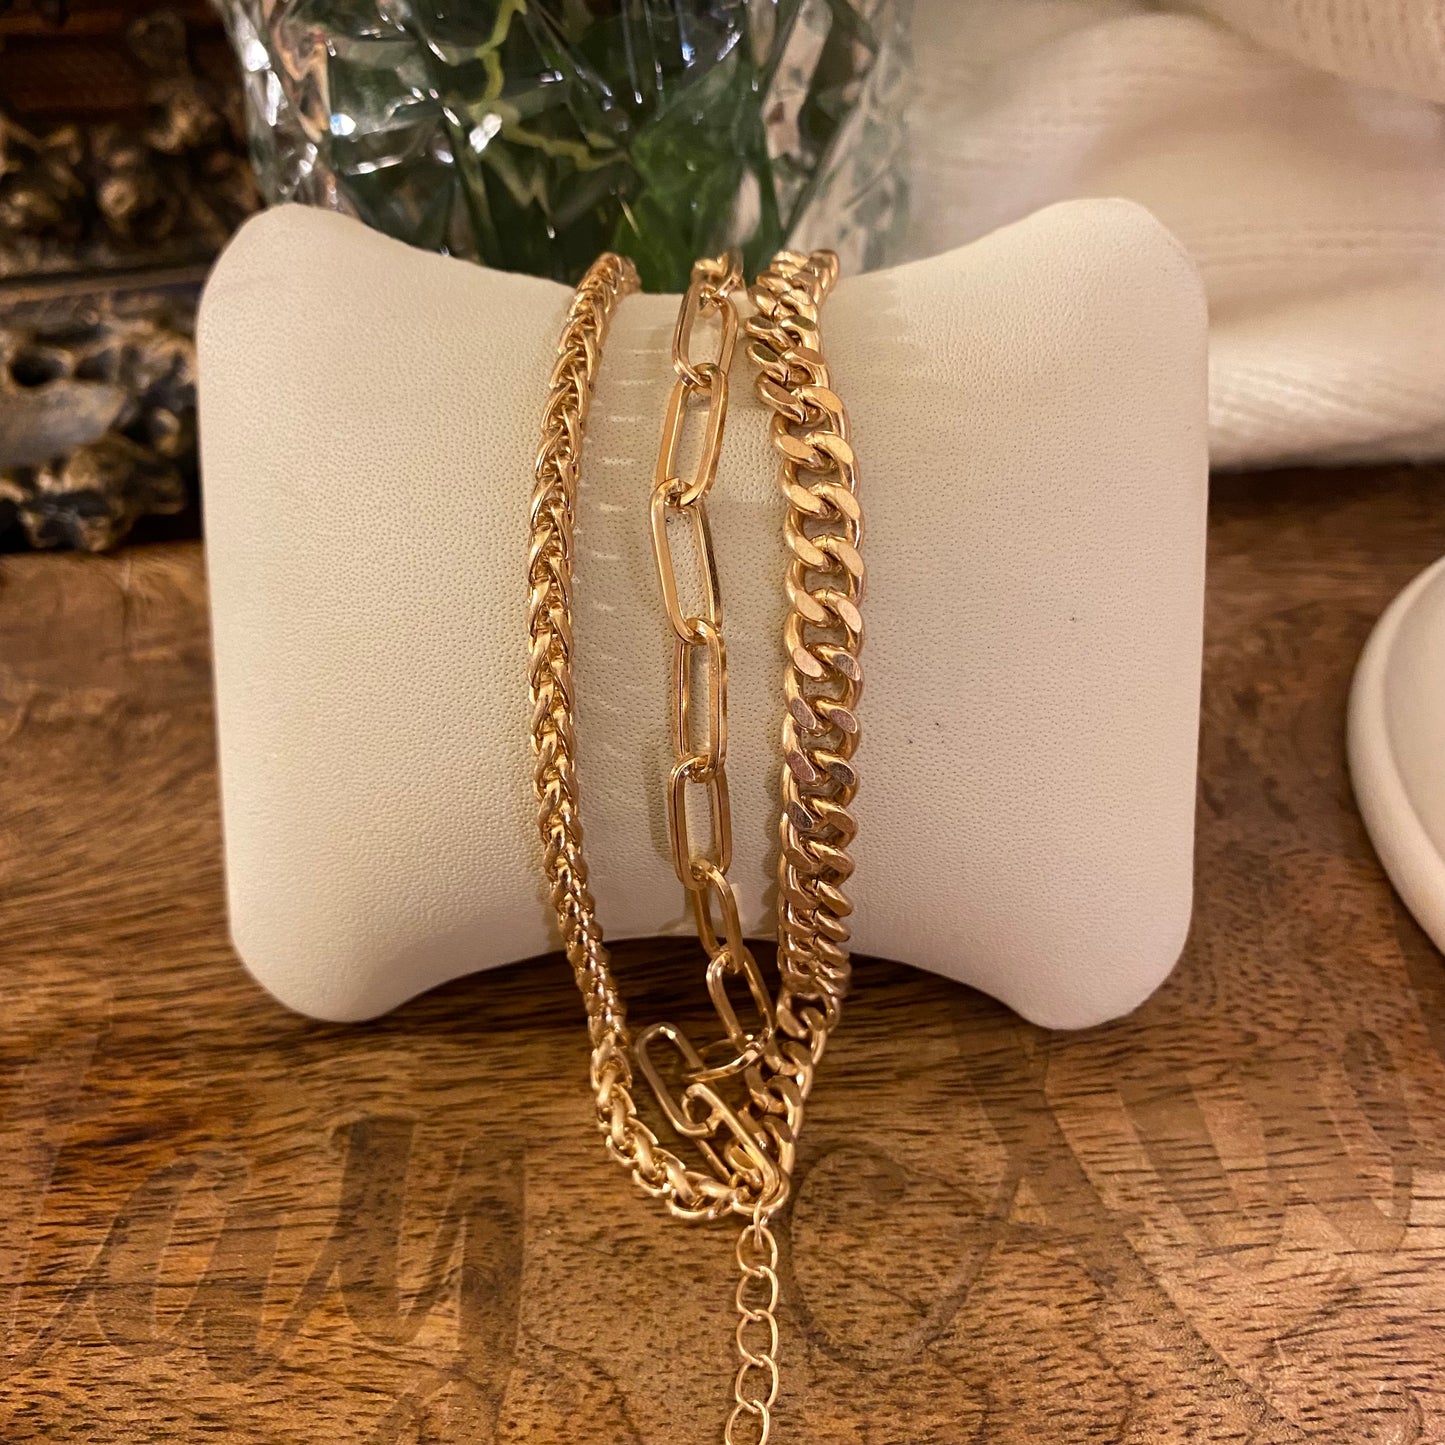 Gold Bracelet 7.5” Plus 2” Extender With Claw Closure